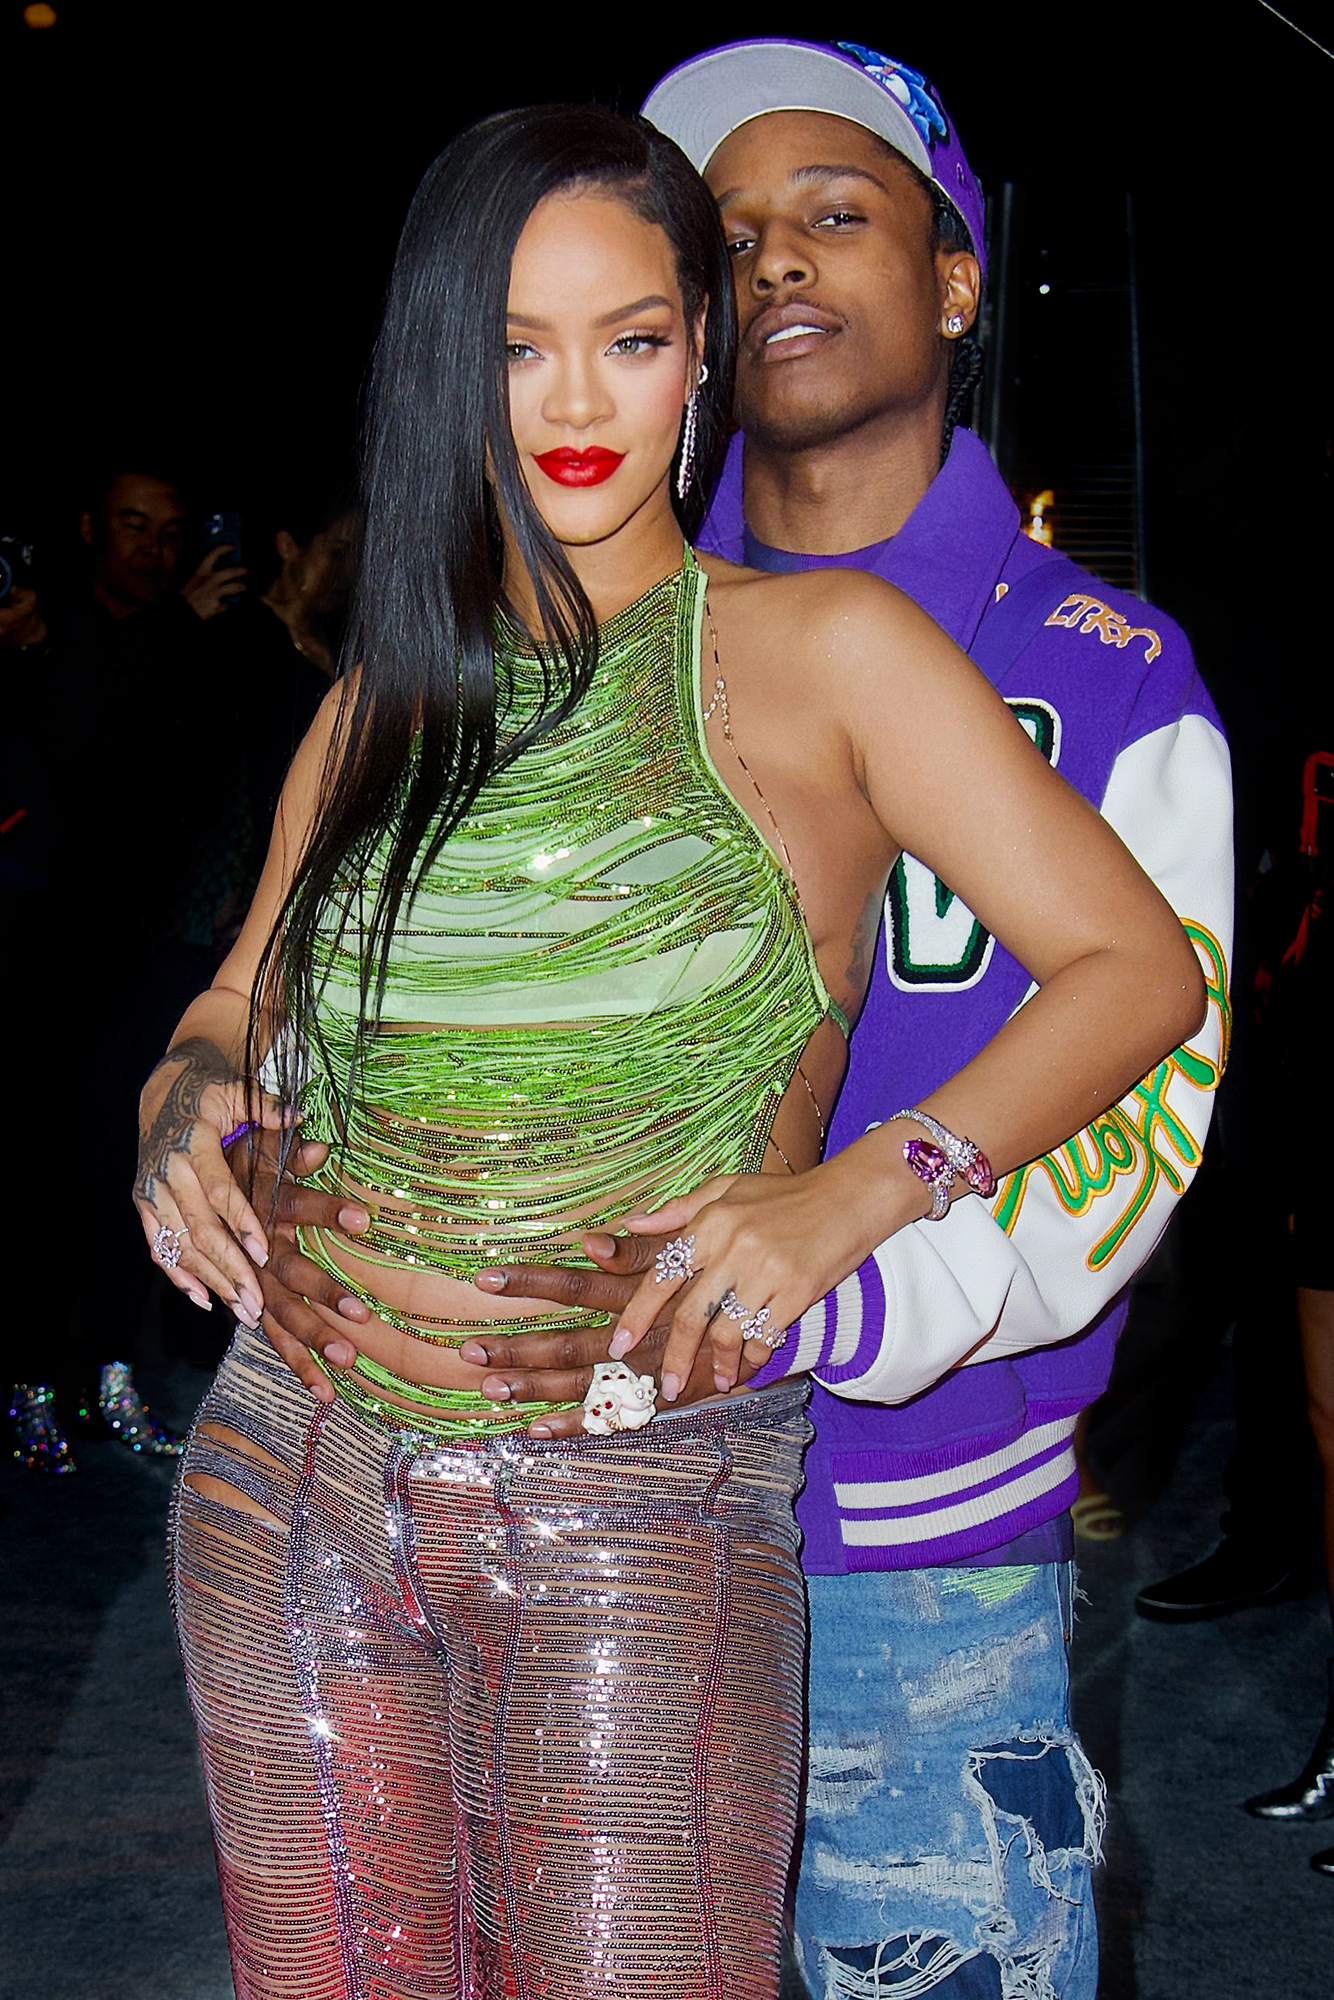 Pregnant Rihanna, ASAP Rocky Show PDA After Cheating Allegations image photo